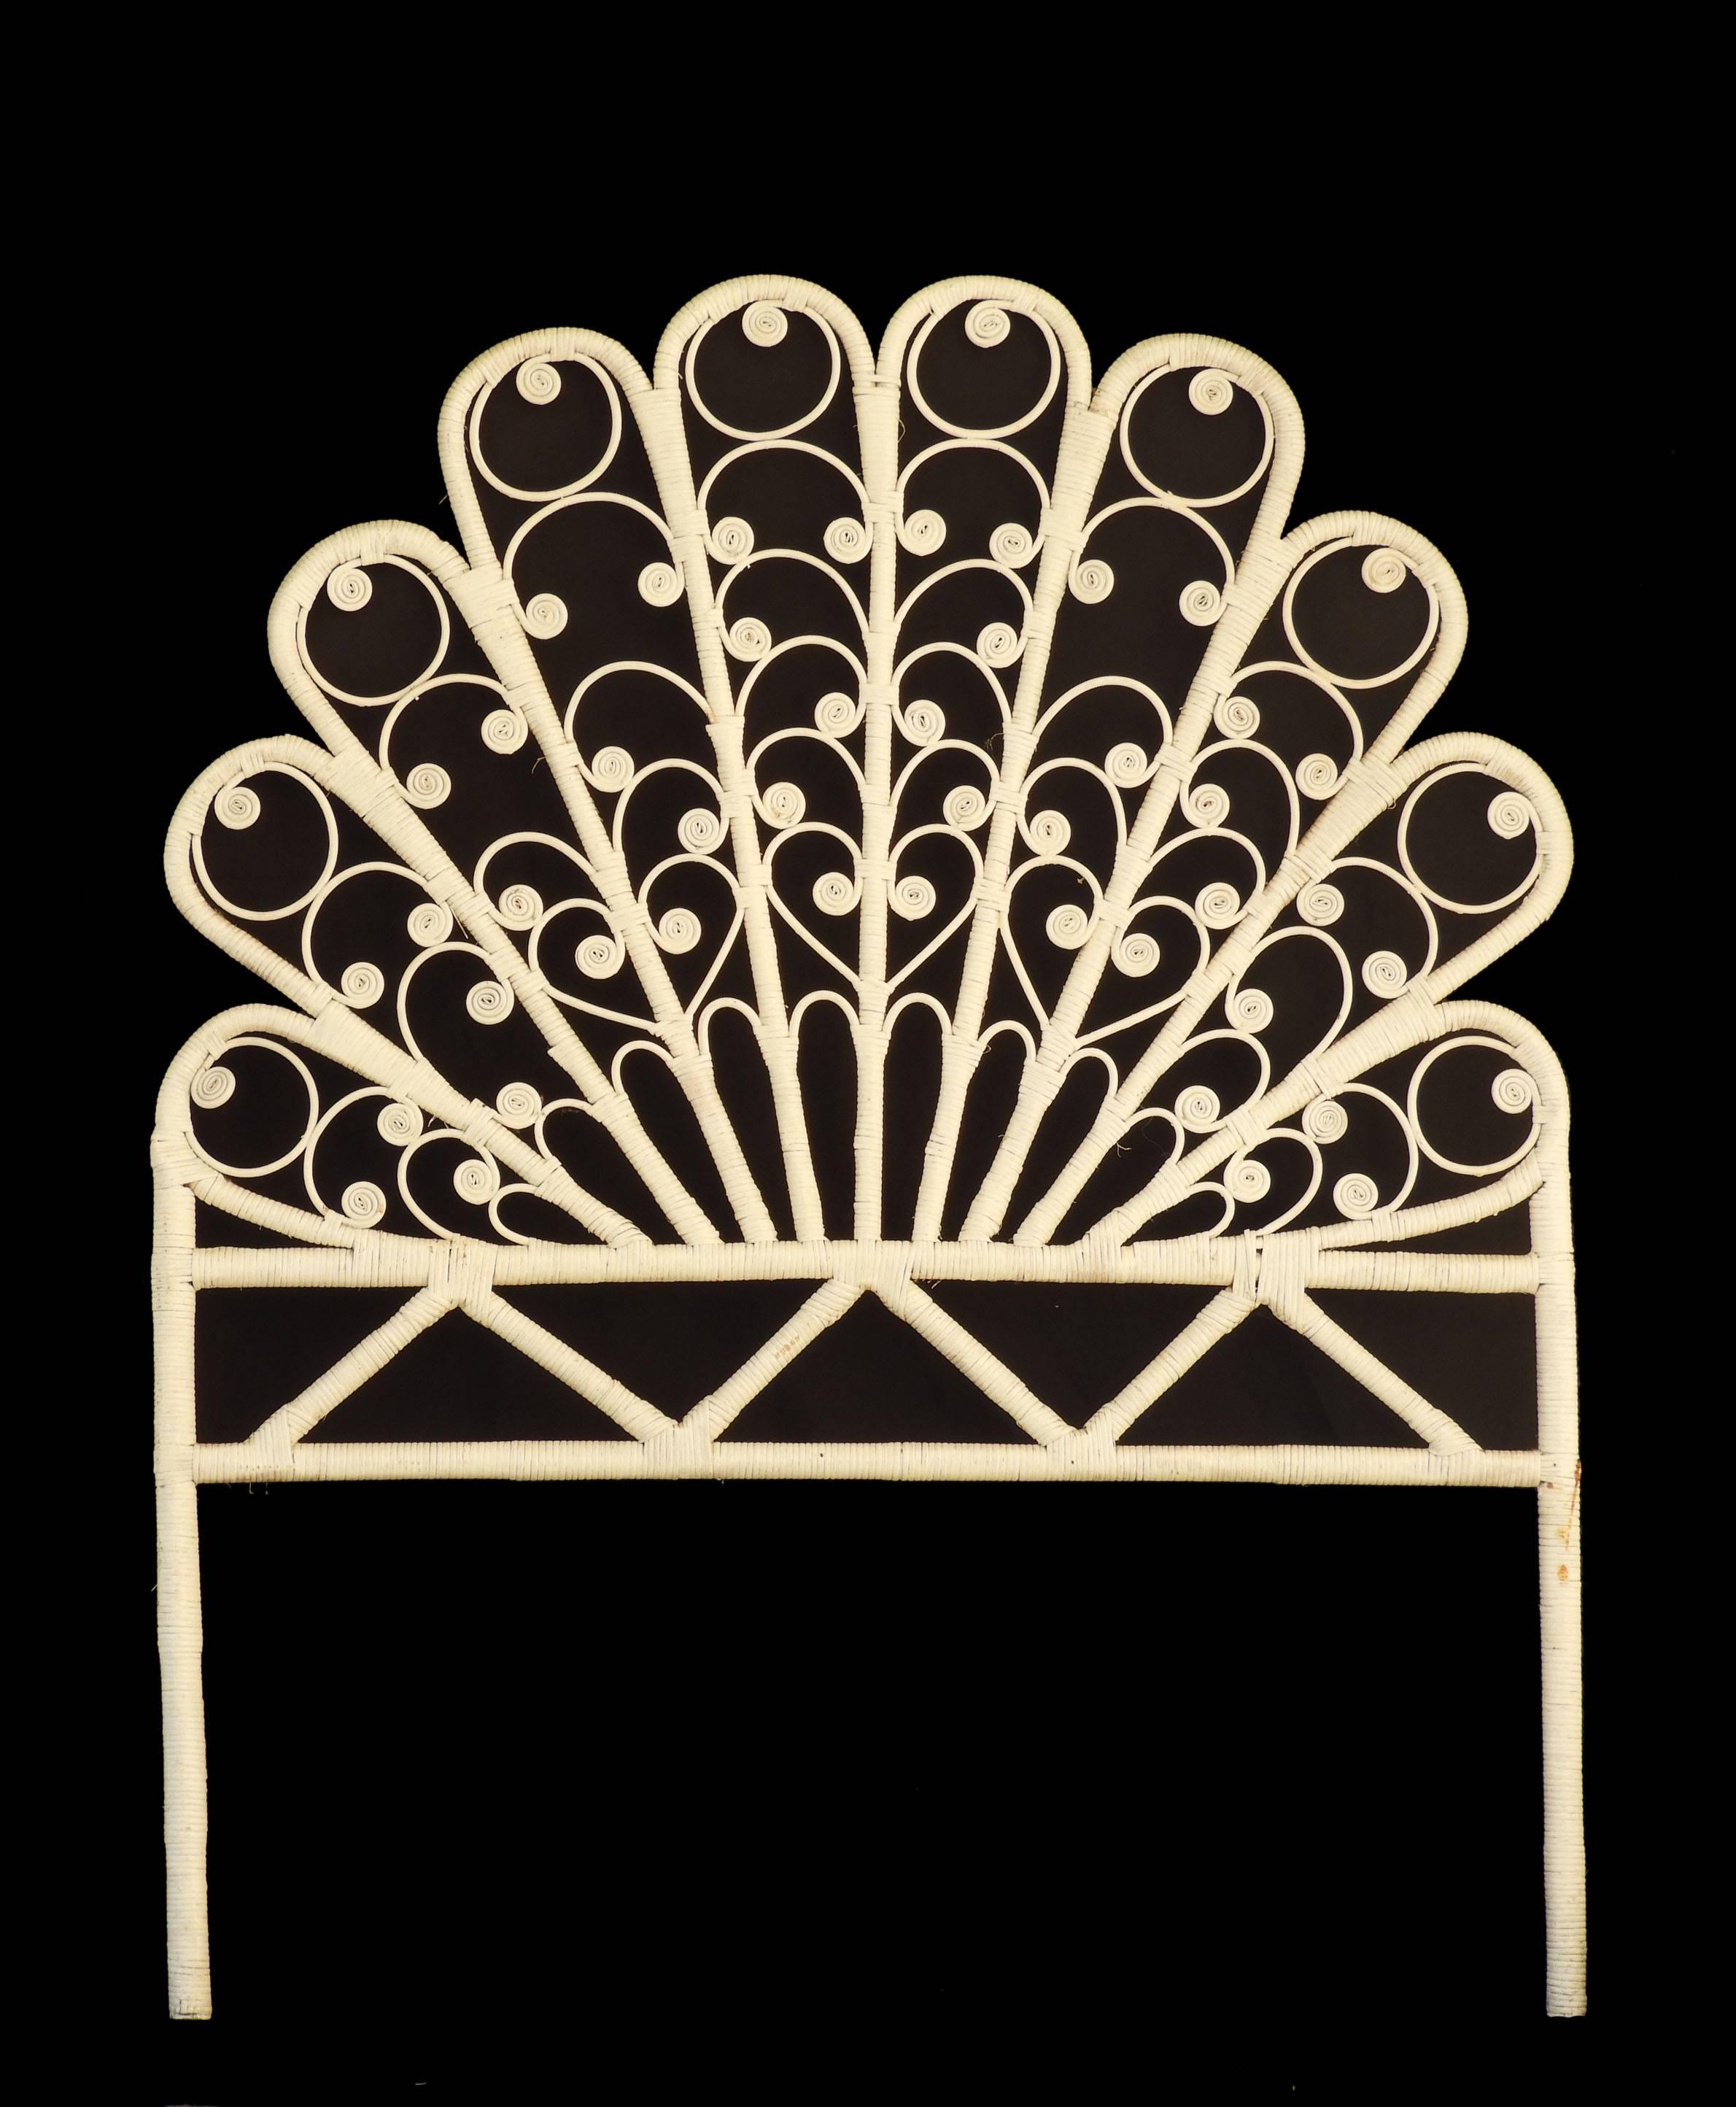 Mid-Century Rattan Headboard c1960-70 Vintage Peacock Tail 39inches wide
There are two available listed separately which would make a Harlequin King or Twins
Original finish white painted Rattan 
We are listing 2 of these separately that are very